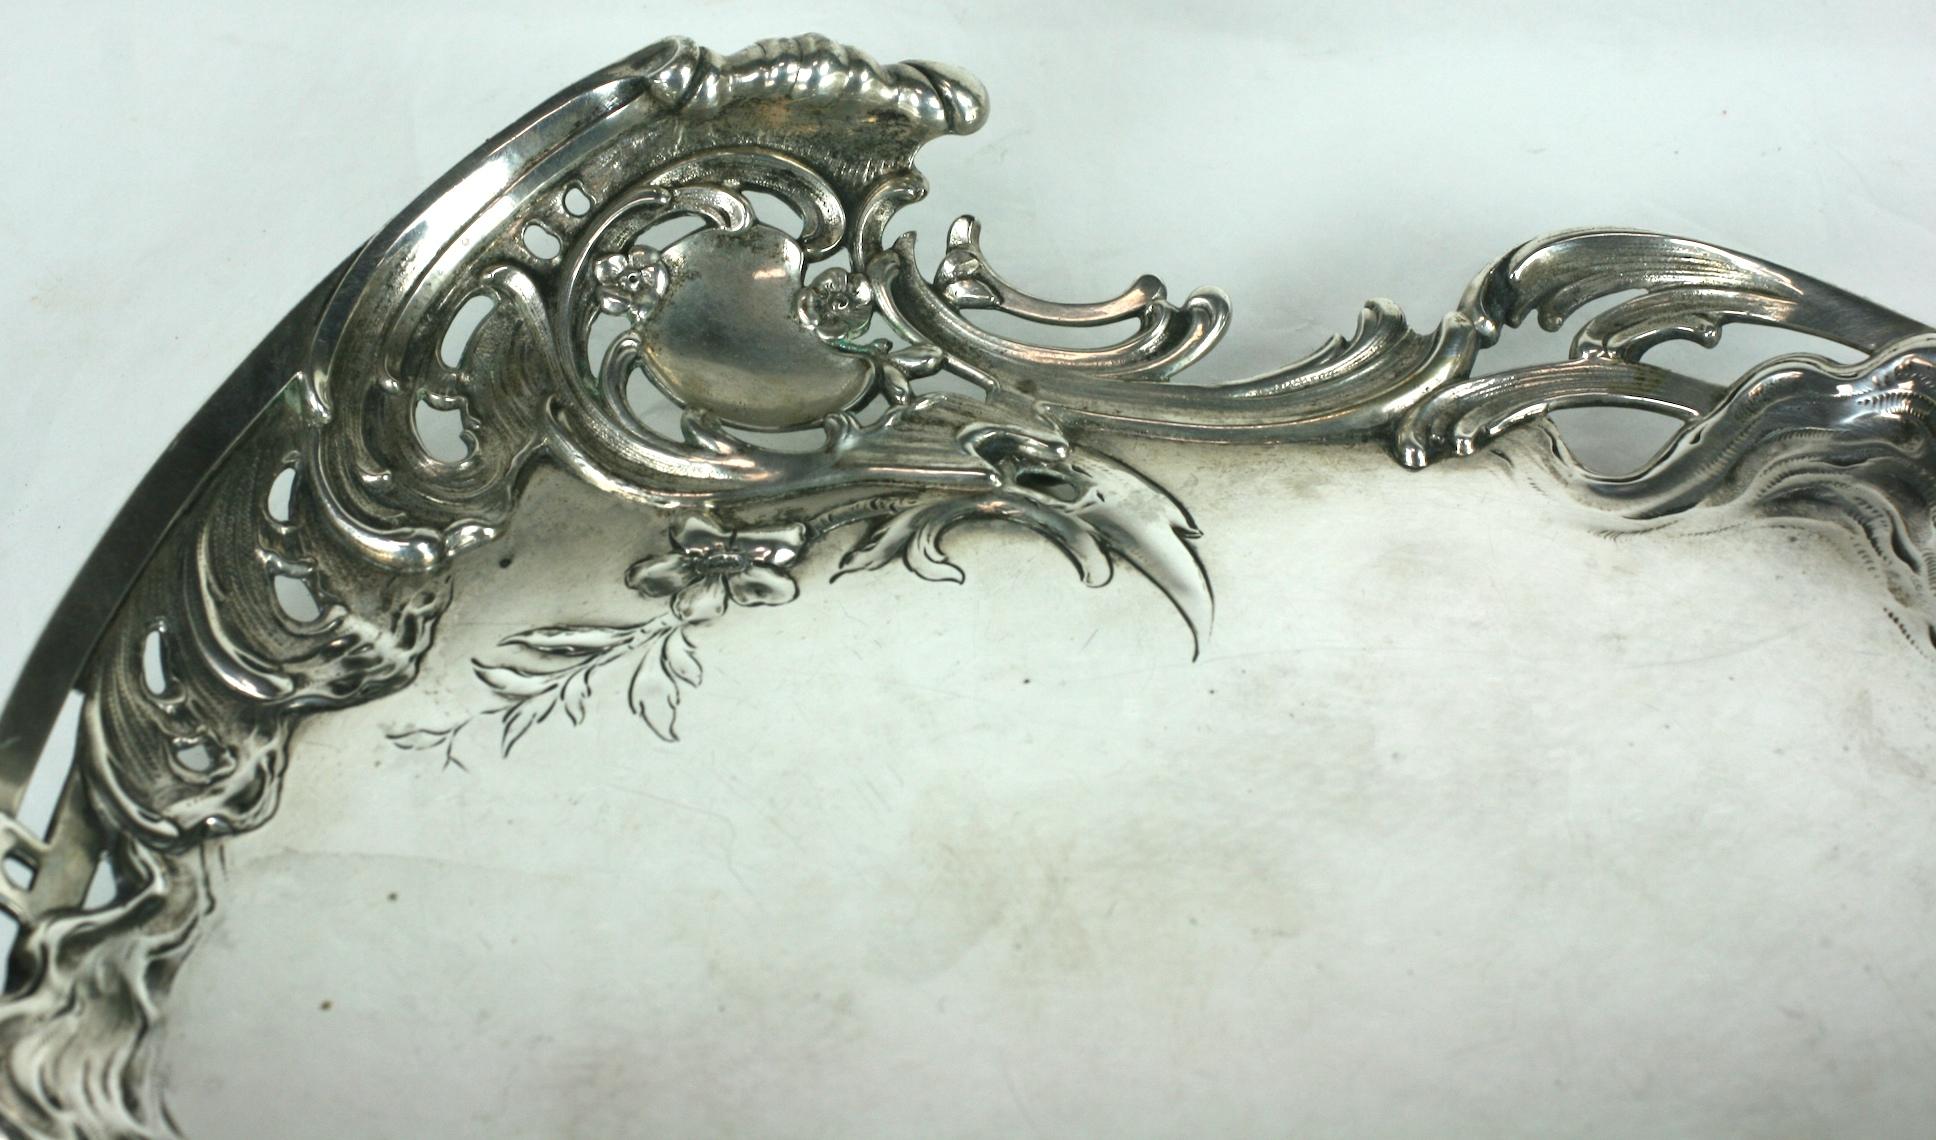 Art Nouveau 800 silver card tray with a wonderful design of realistic waves crashing against an openwork fence motif with a central wave or cartouche. Heavy quality 800 silver, beautiful detailing on 4 matching feet.
In the period, likely used for